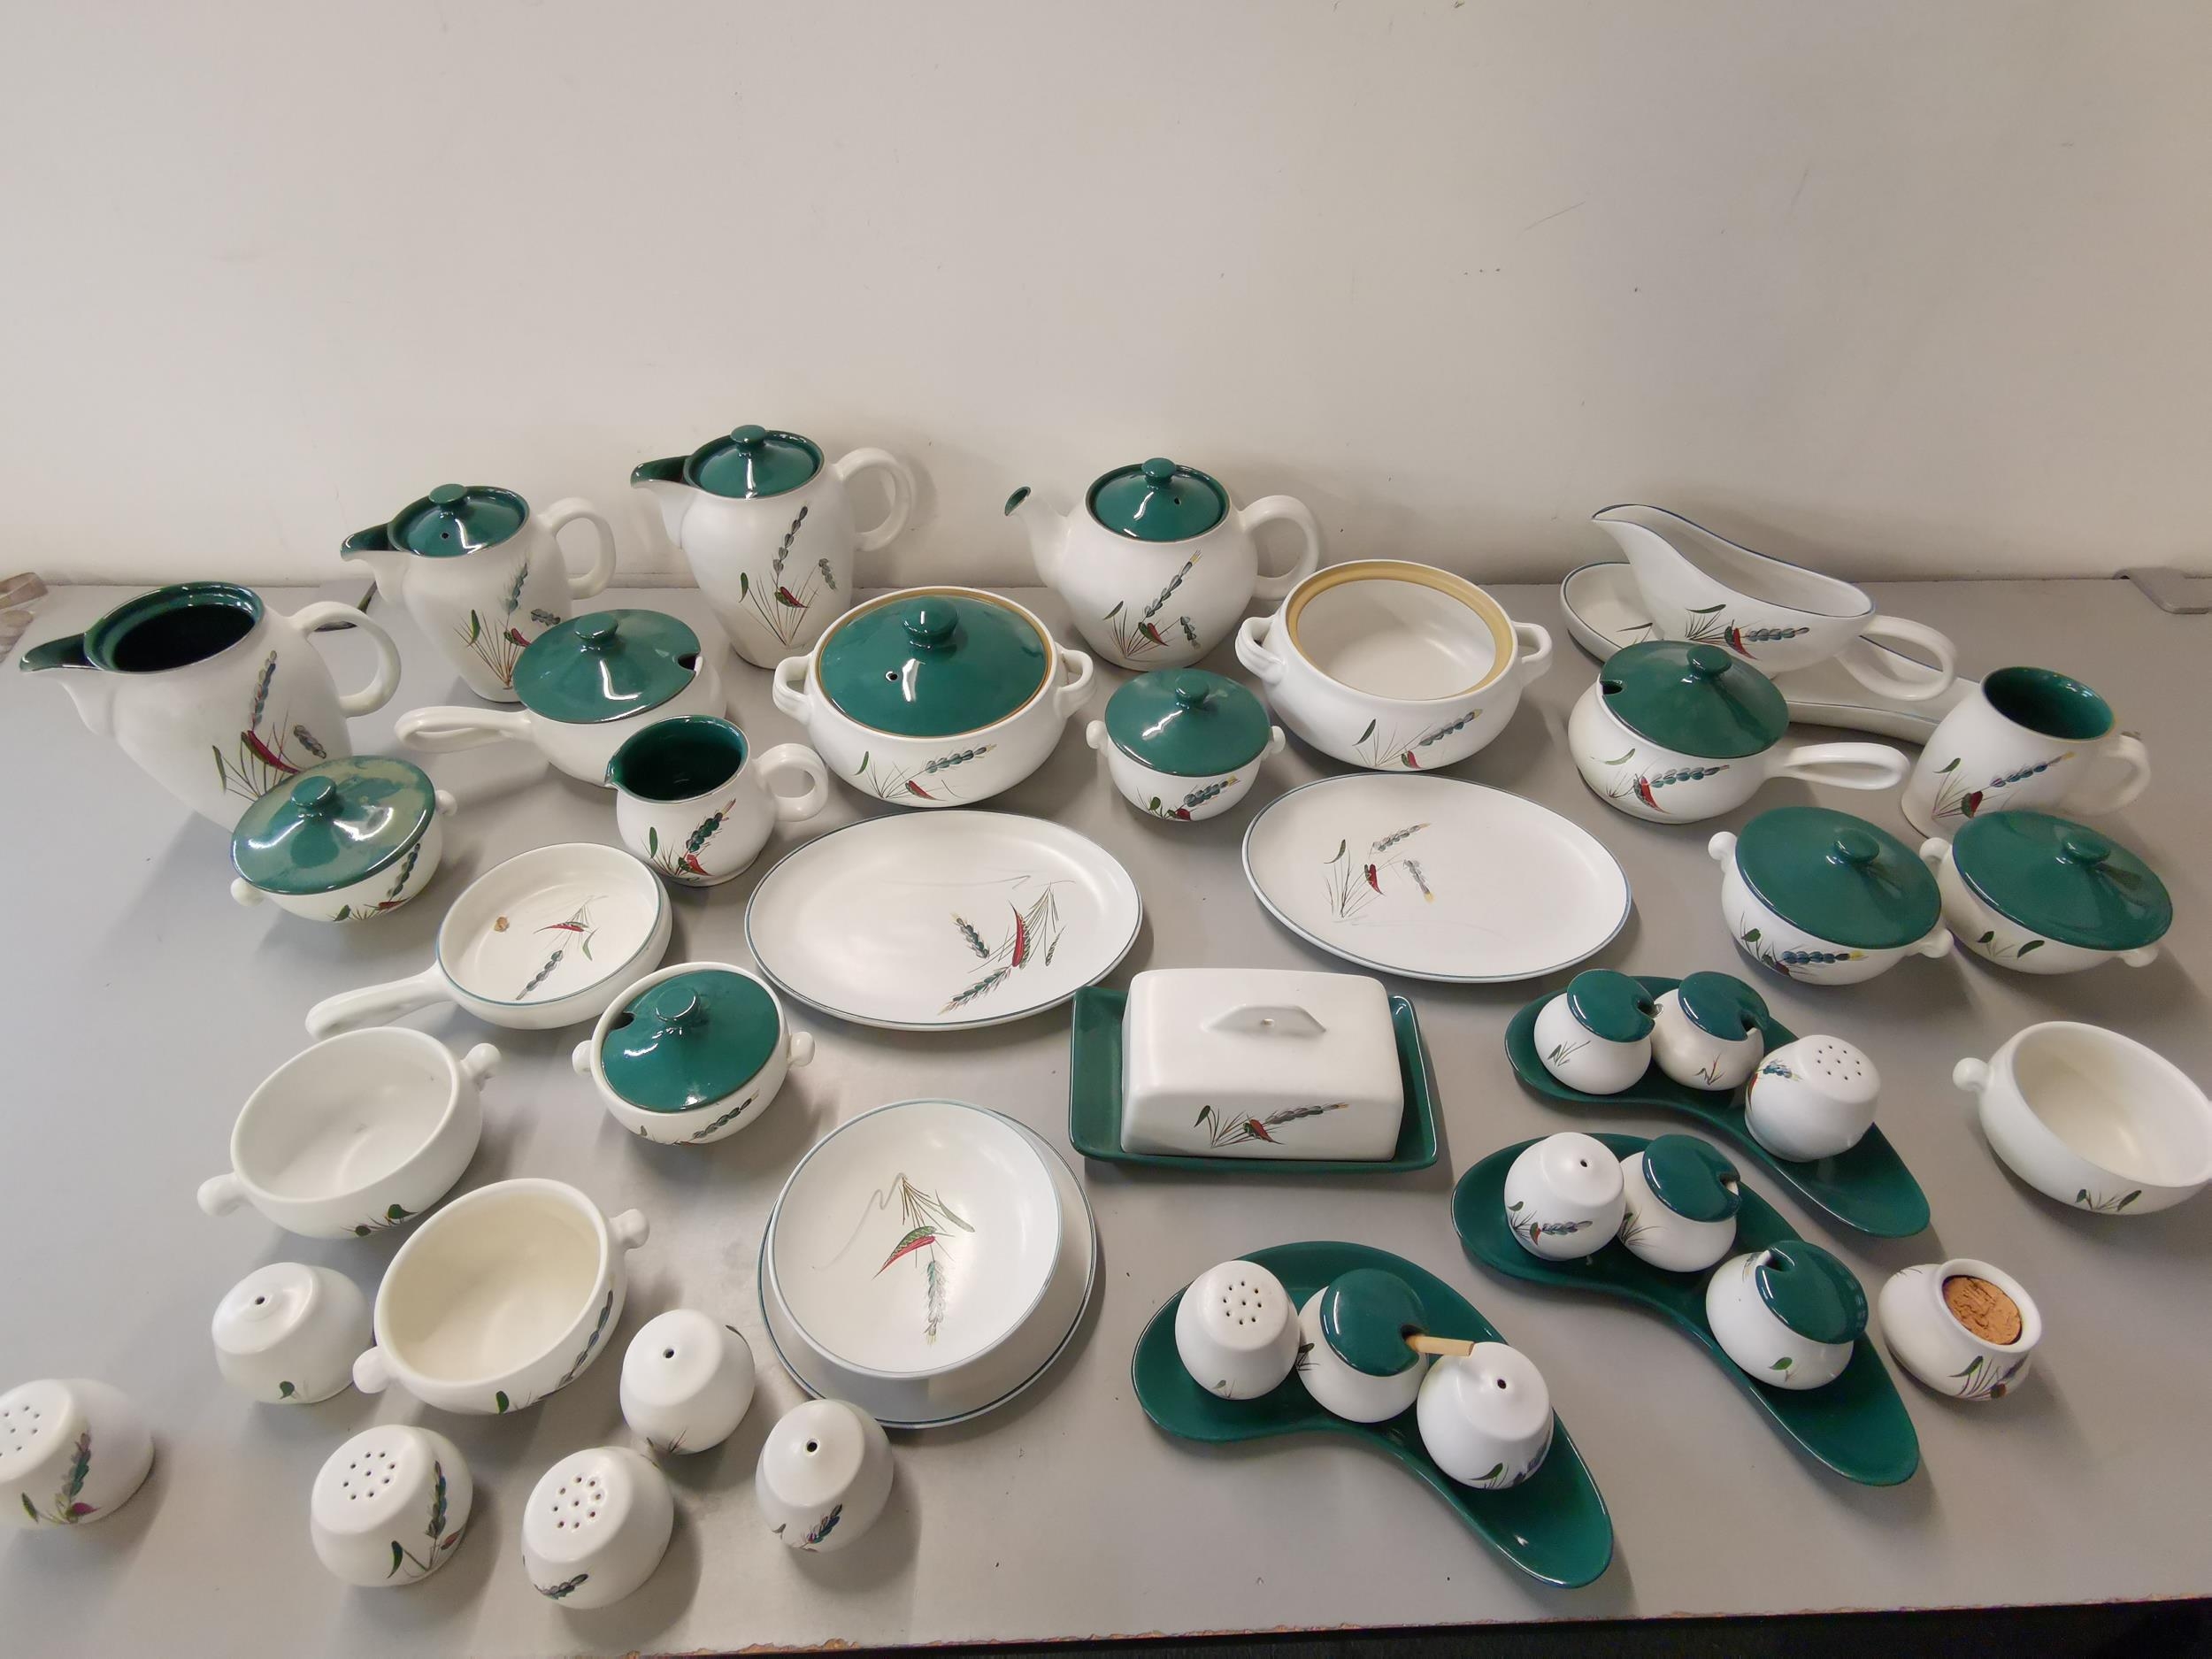 A quantity of Denby stoneware crockery with green wheat design signed Albert Colledge Location: LWB